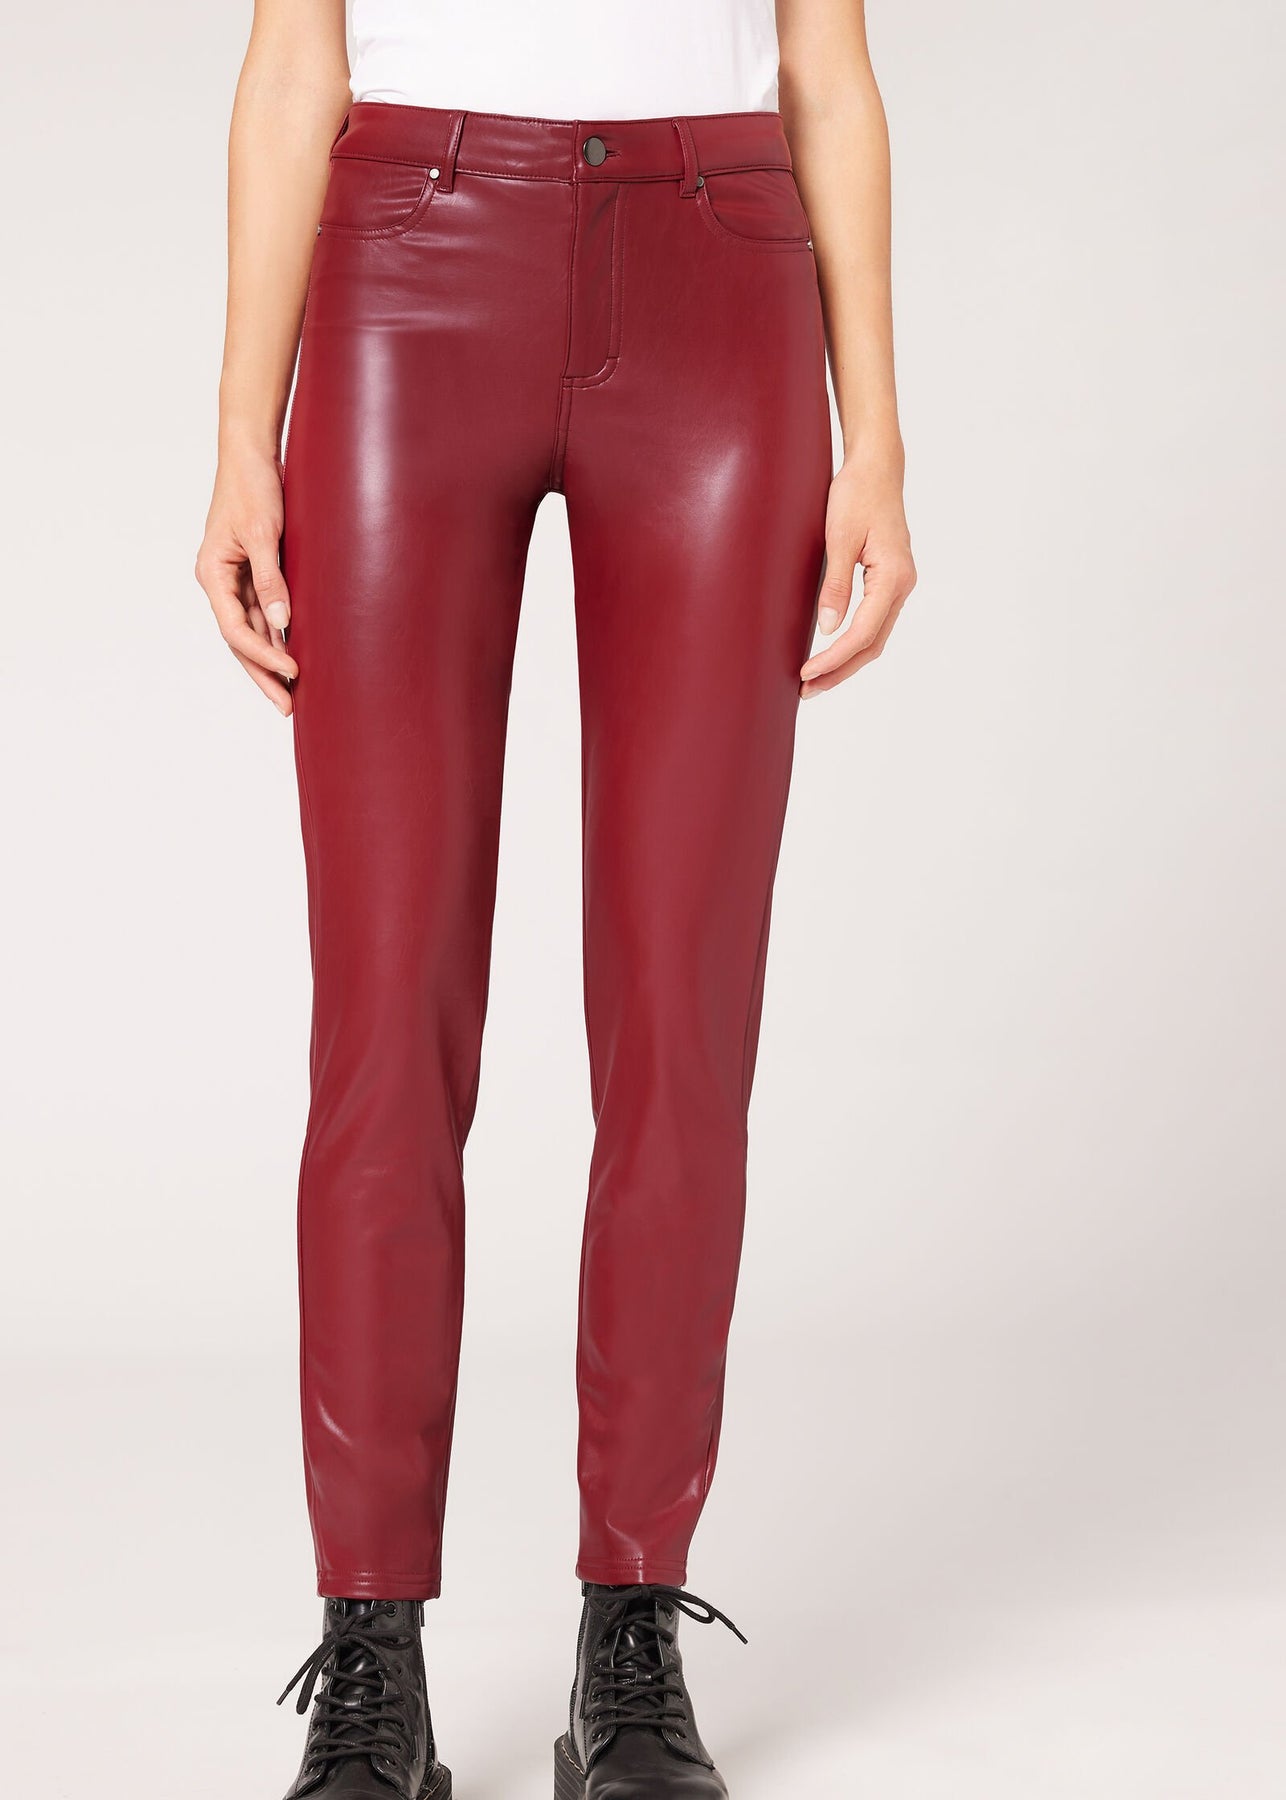 calzedonia, Pants & Jumpsuits, Leather Effect Thermal Cigarette Leggings